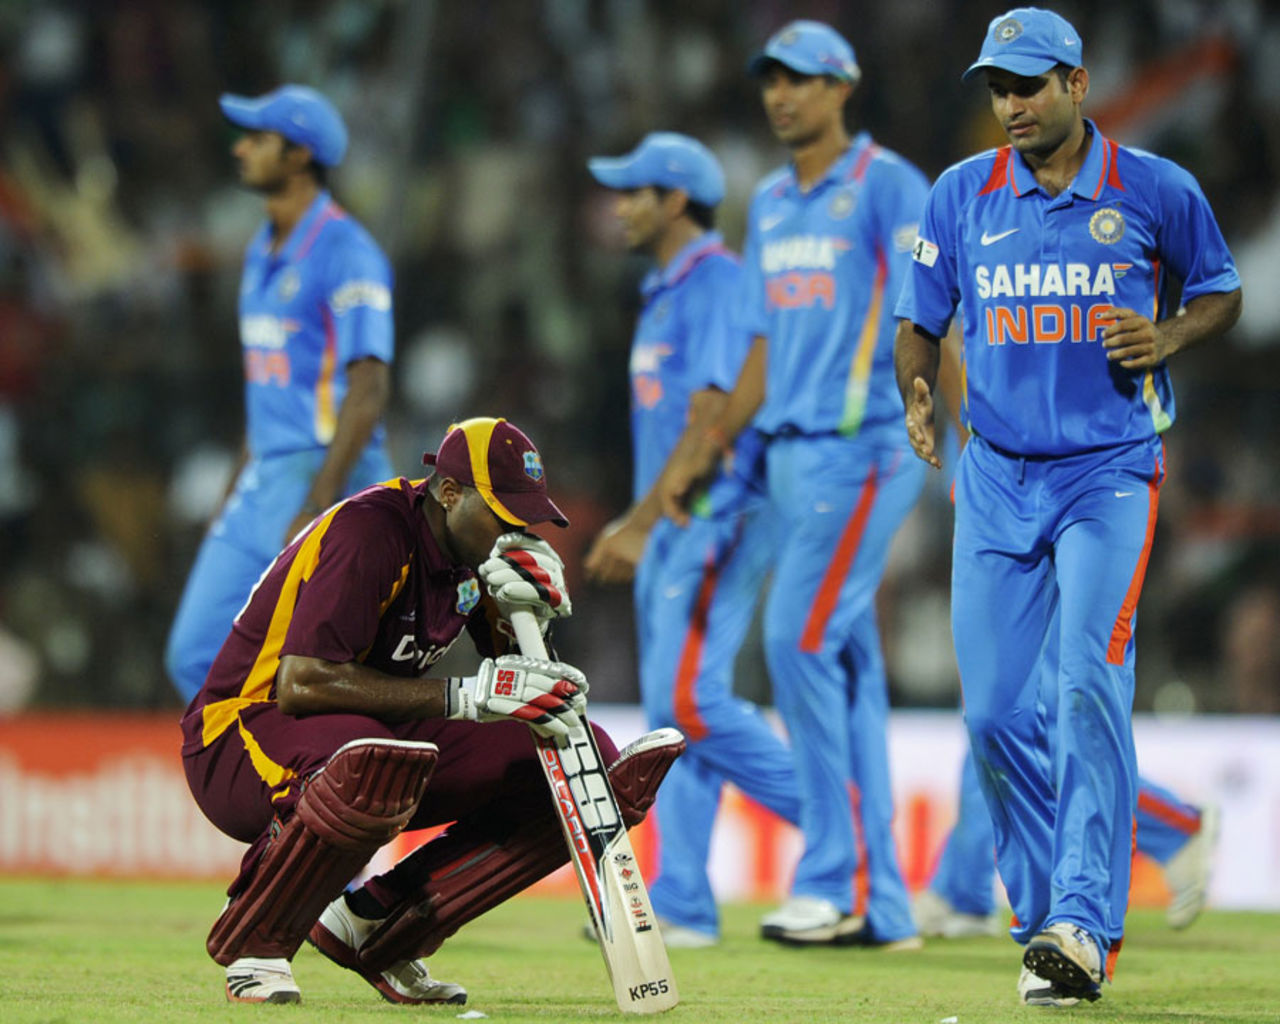 Kieron Pollard shows his disappointment after West Indies' loss, India v West Indies, 5th ODI, Chennai, December 11, 2011